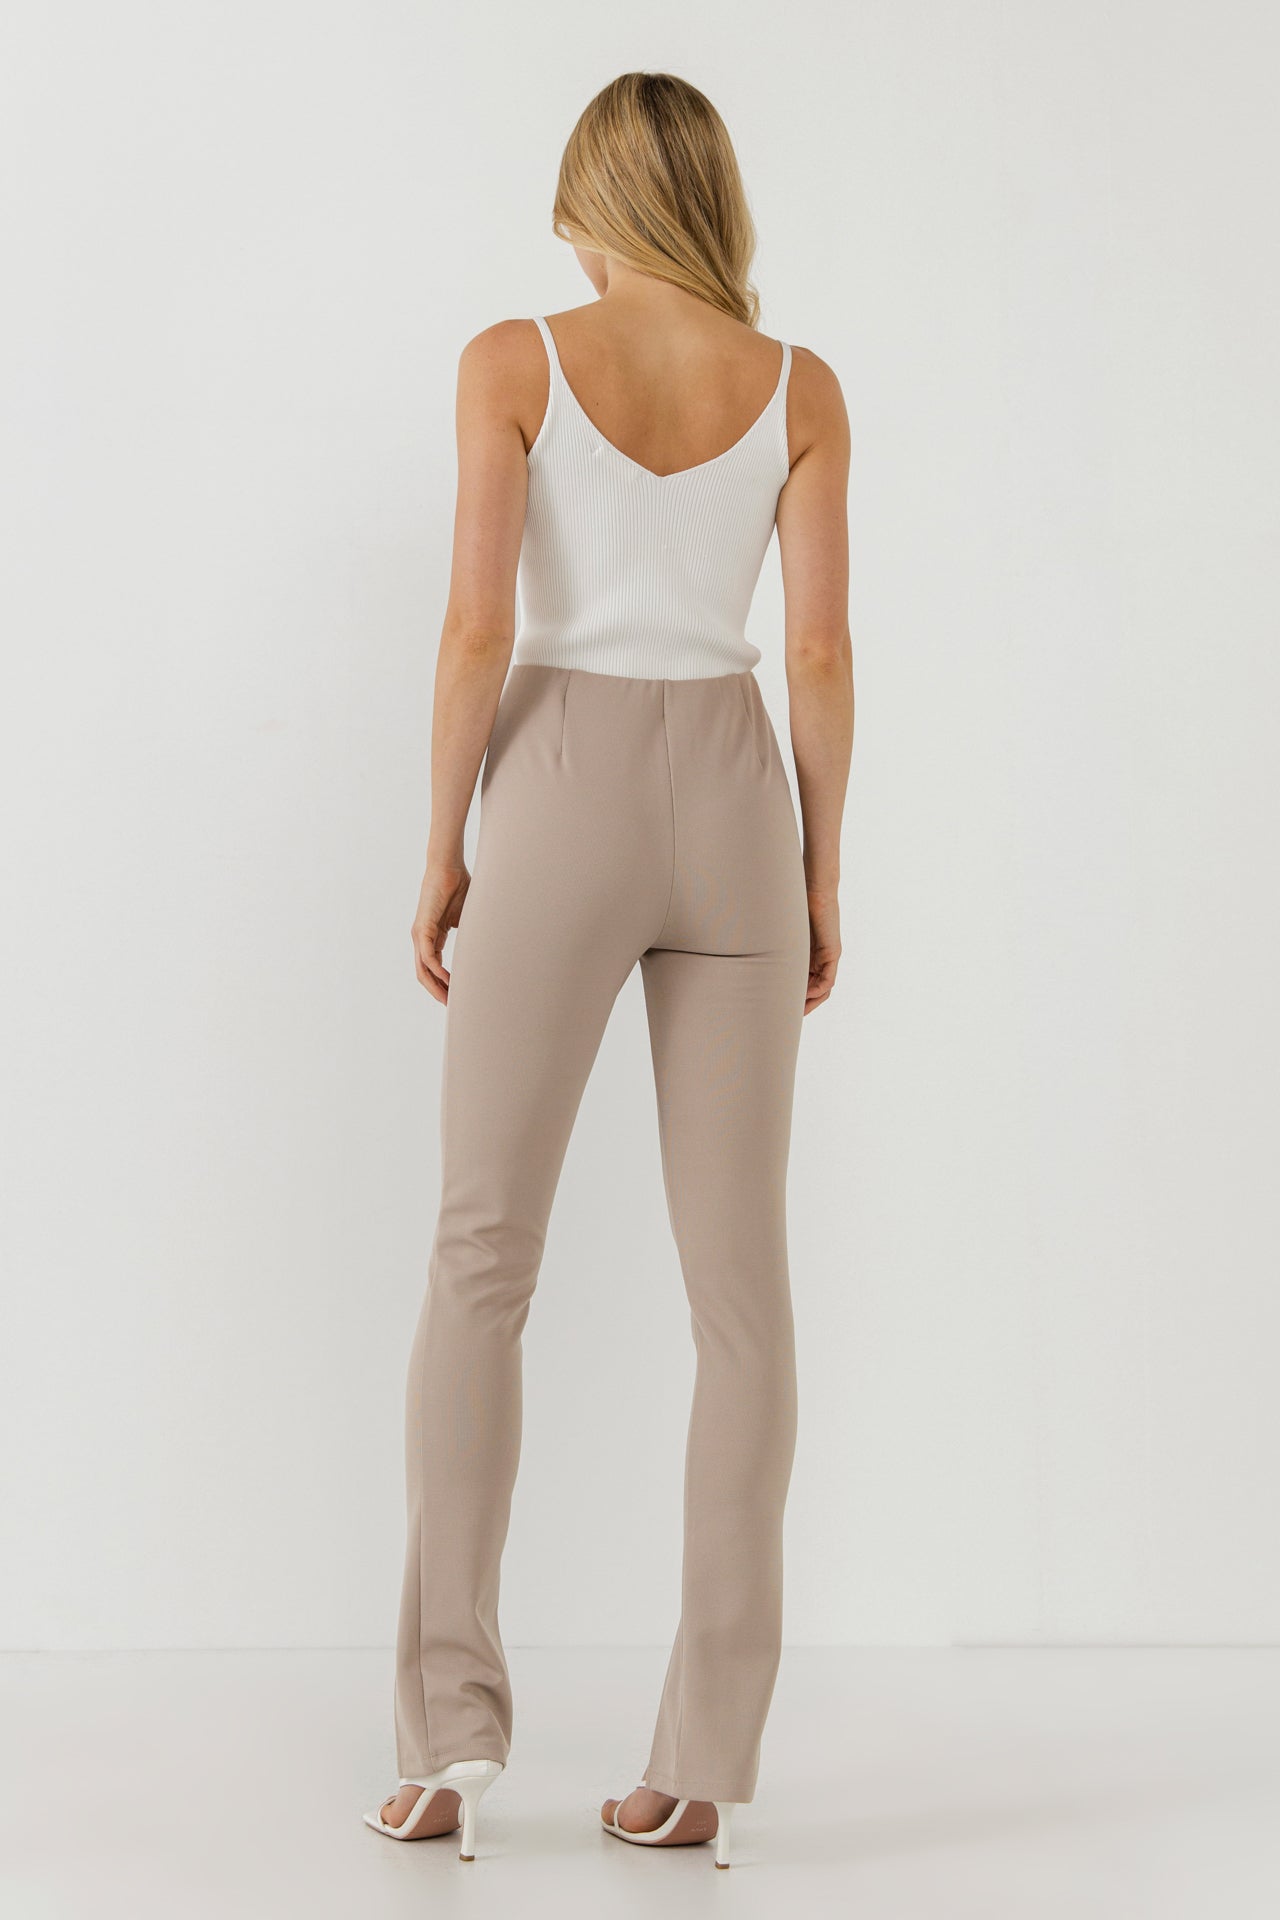 GREY LAB - Front Slit Flares - PANTS available at Objectrare